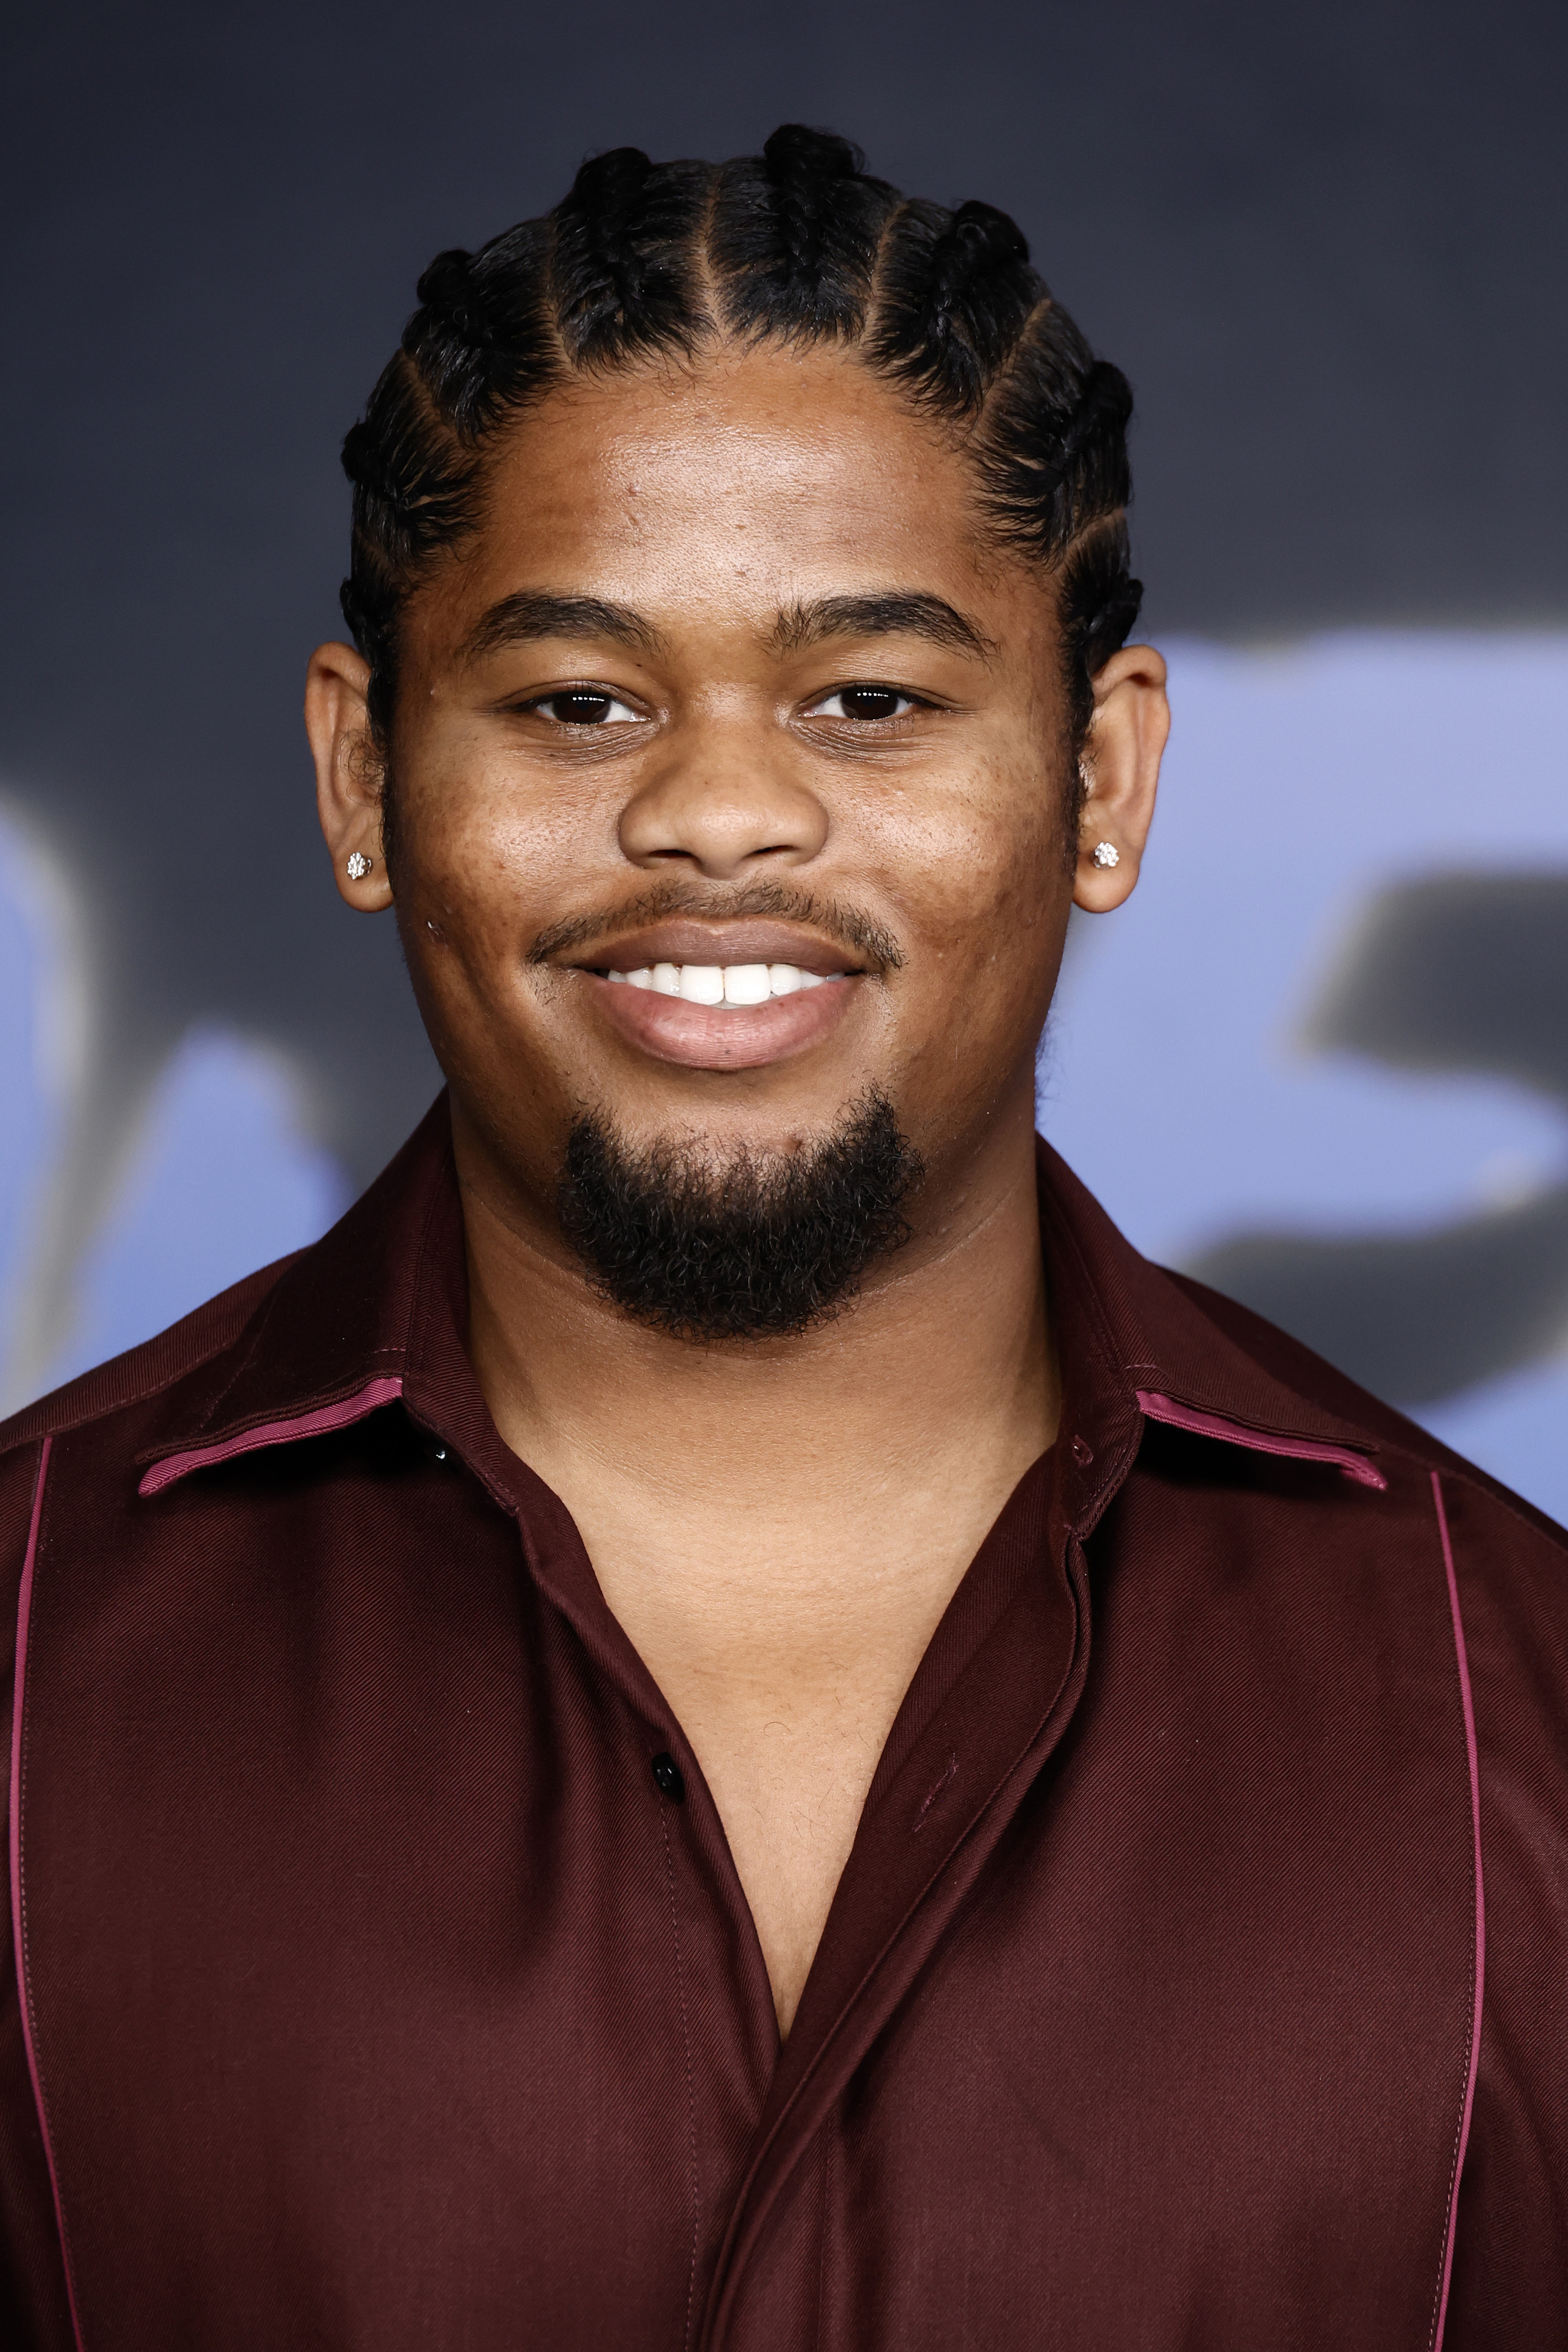 Isaiah John attends the Red Carpet Premiere event for the Sixth and Final Season Of FX's "Snowfall" at the Academy Museum of Motion Pictures, Ted Mann Theater on February 15, 2023 in Los Angeles, California | Source: Getty Images